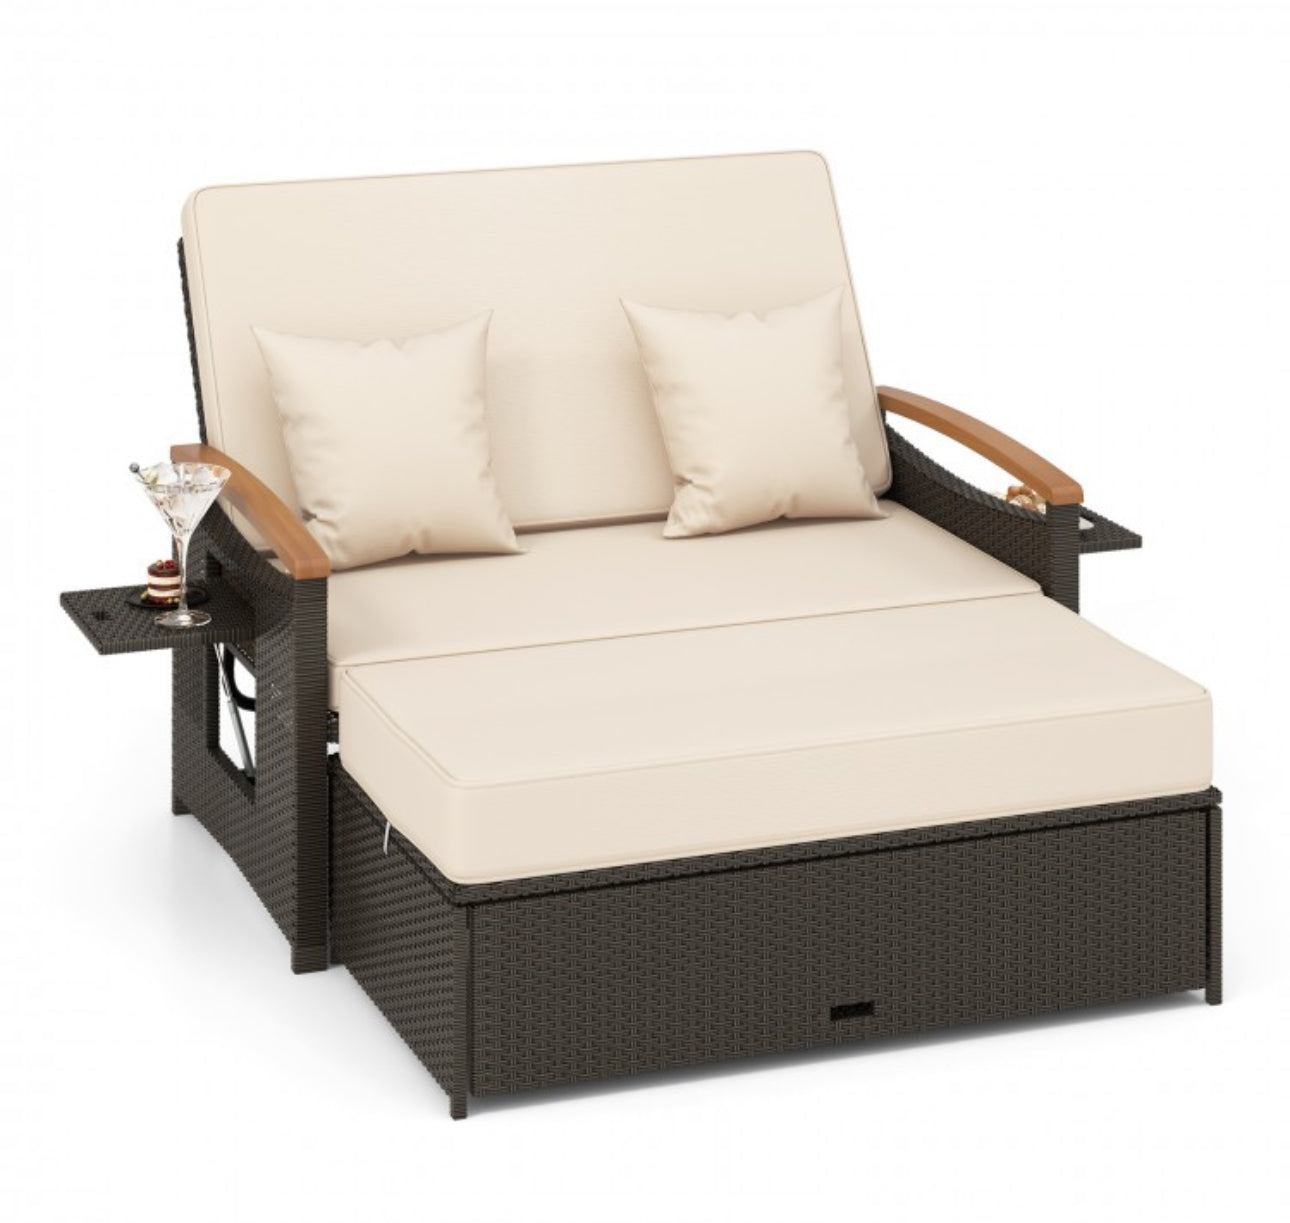 Very Relaxing 3-in-1 Versatile Beautiful Design | Outdoor Wicker Daybed With Folding Panels & Storage Ottoman | Patio